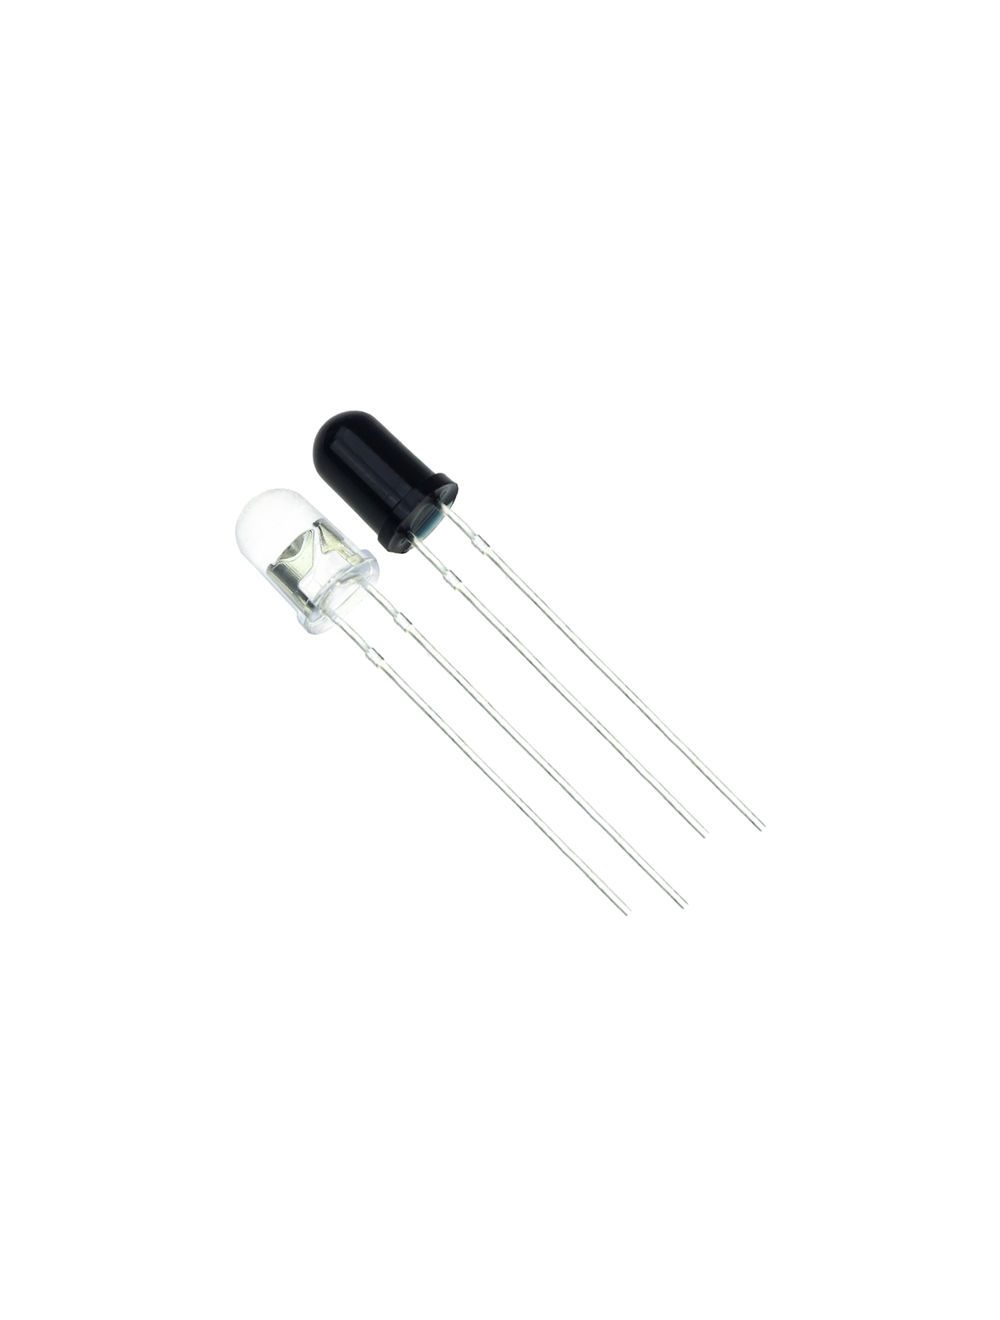 1D8  5mm IR Transmitter and Receiver LED Tx Rx Pair Photodiode